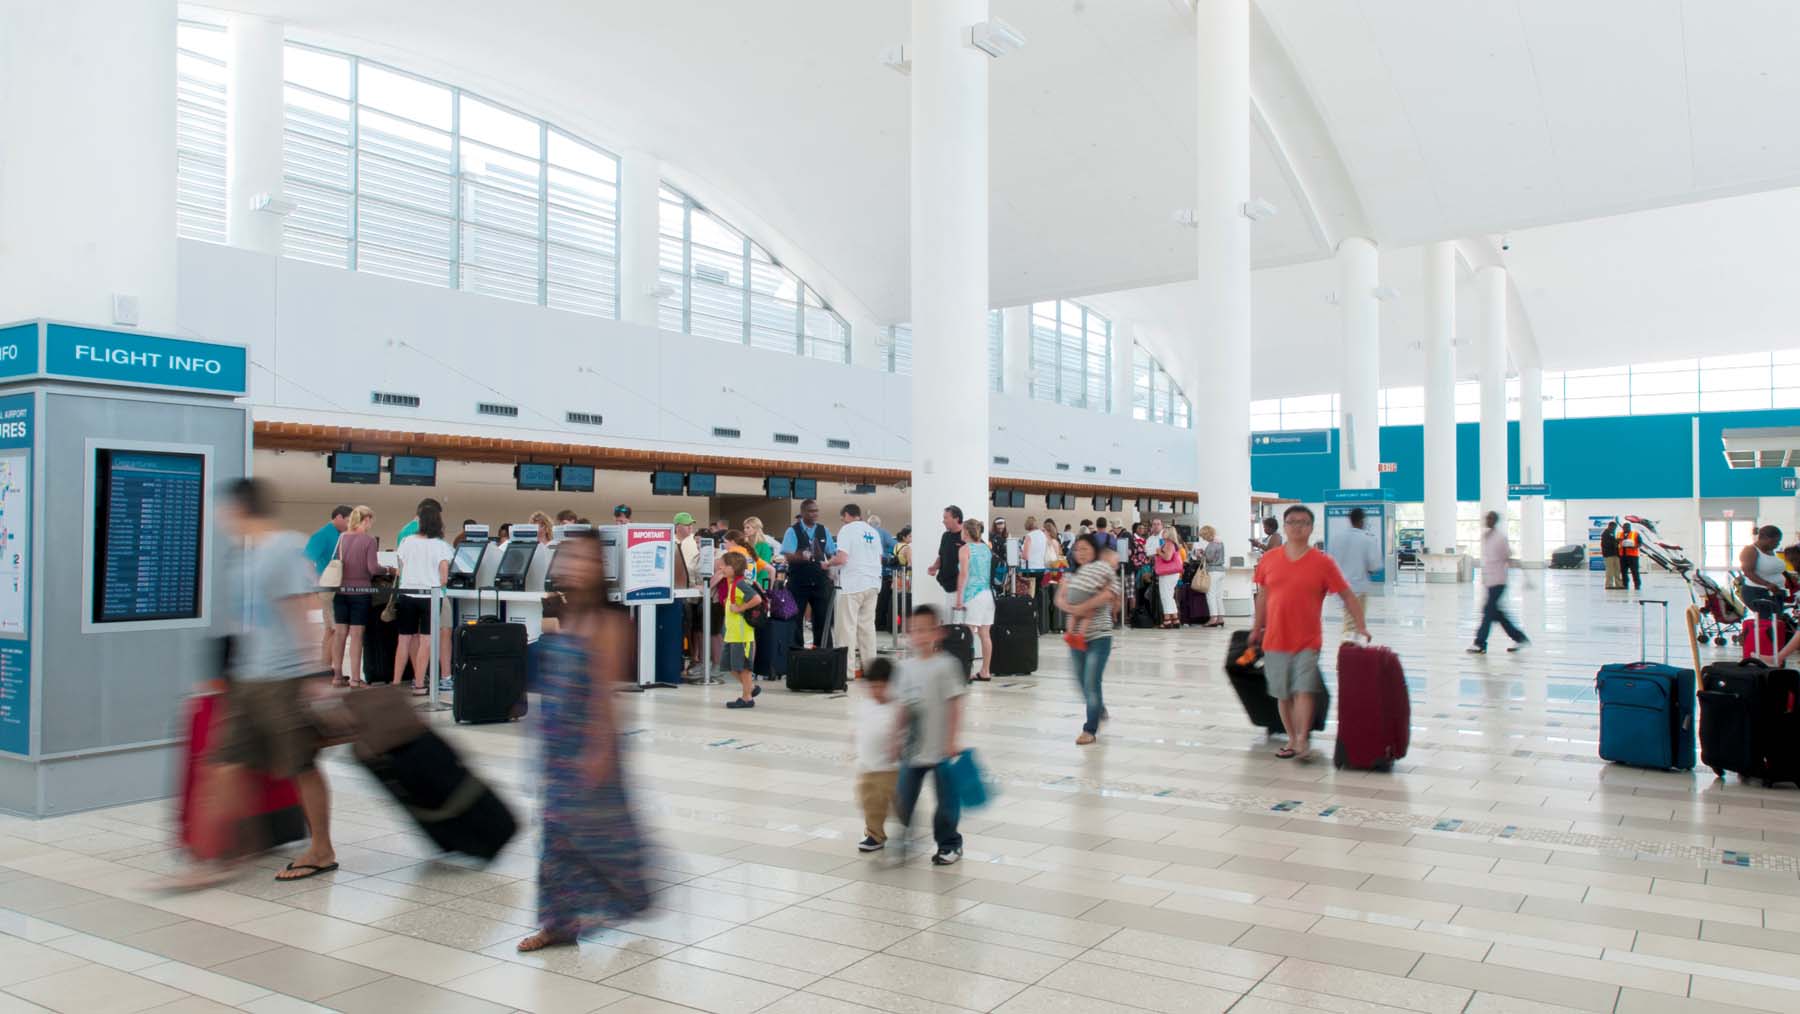 A lot of travelers walk past the check-in counter in an airport terminal.